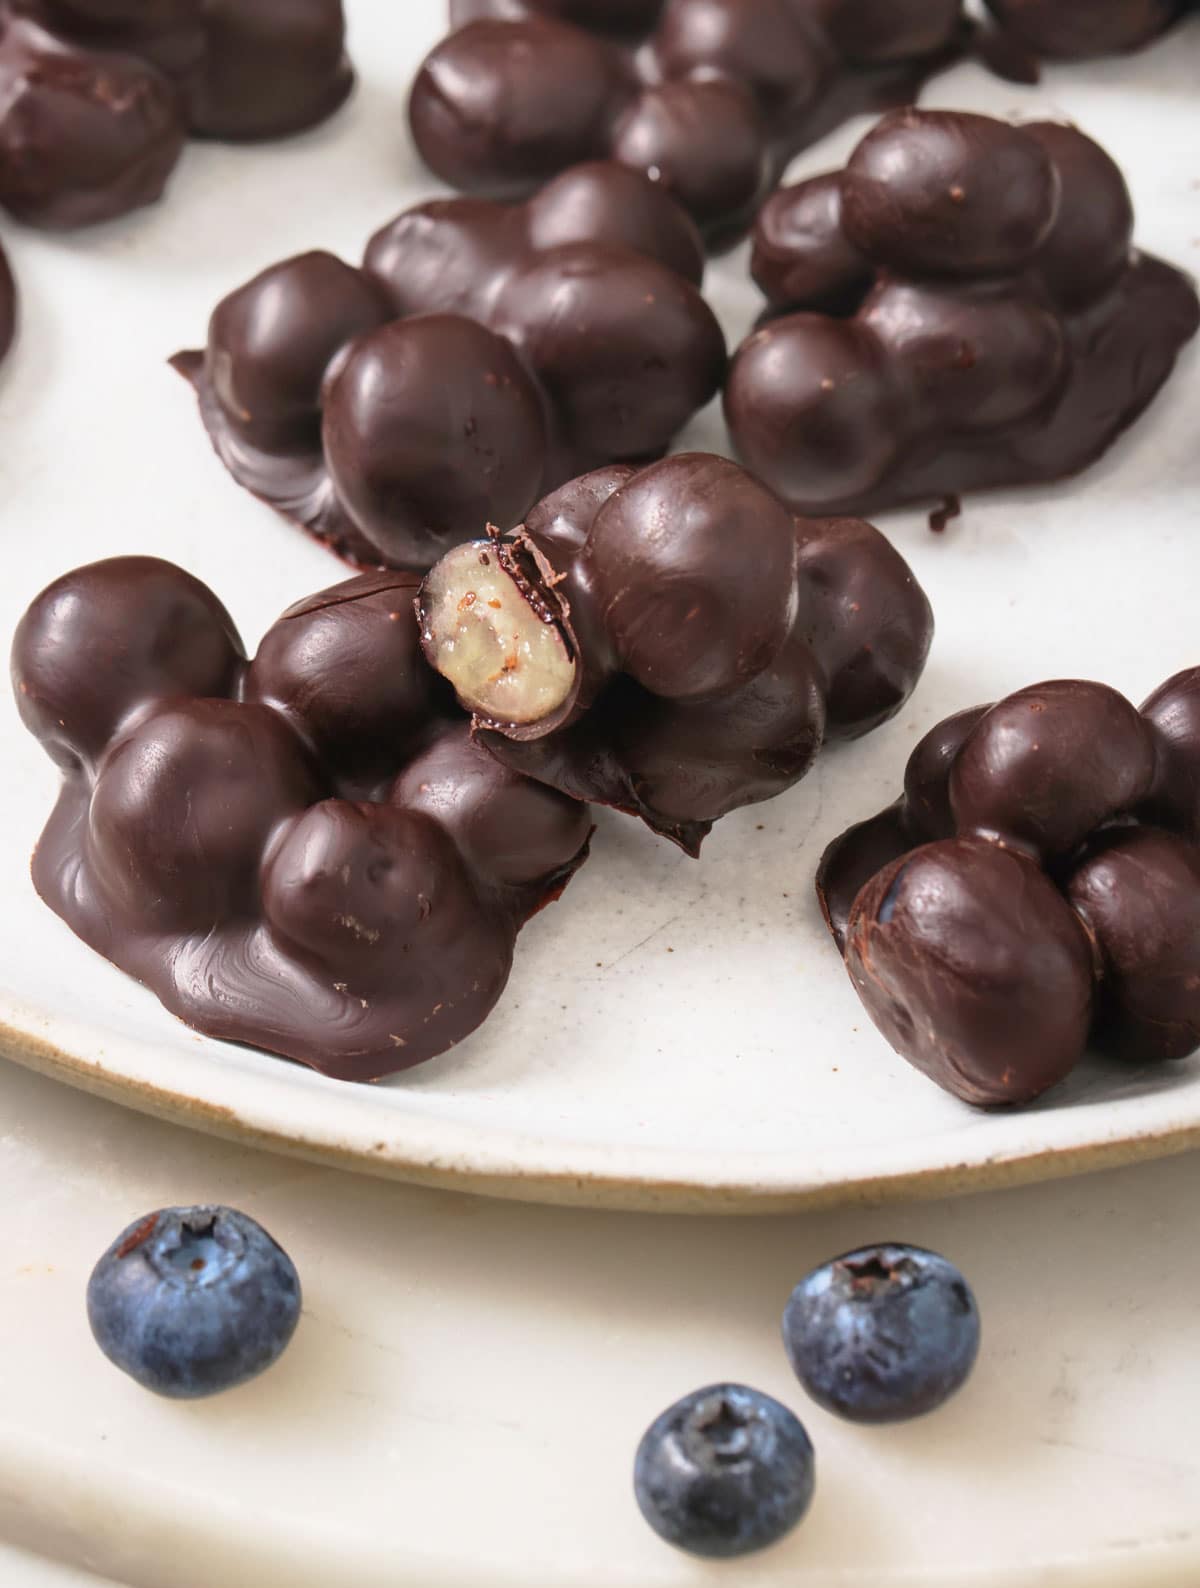 A chocolate coated blueberry cluster that is bitten into showing a blueberry inside.